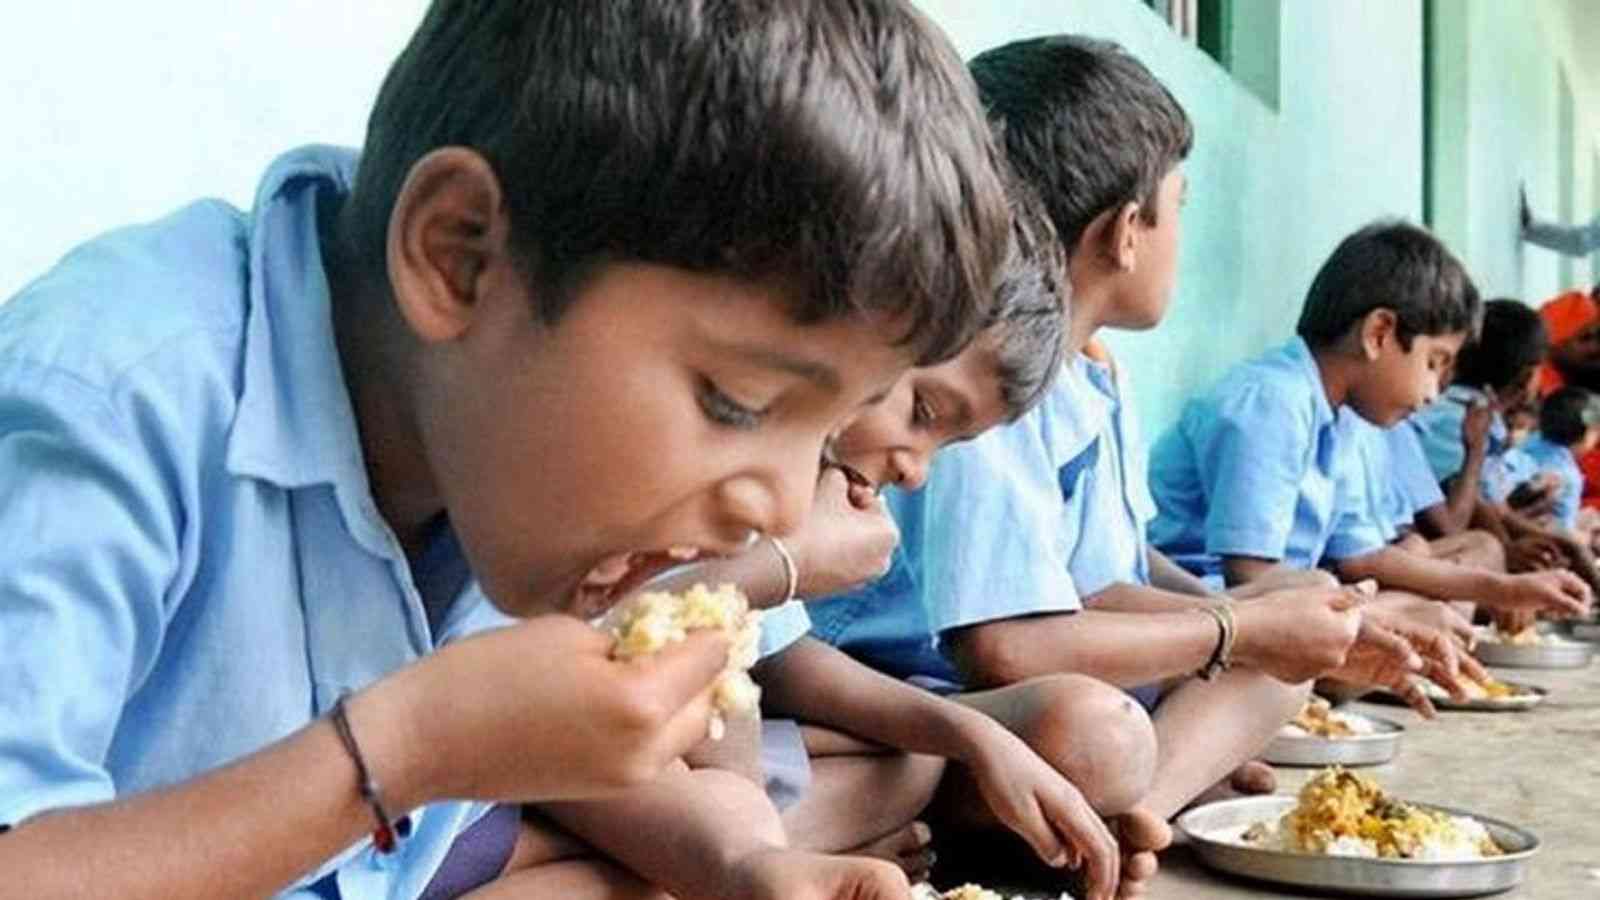 WB govt tells schools to distribute midday meal supplies to guardians as summer vacation extended